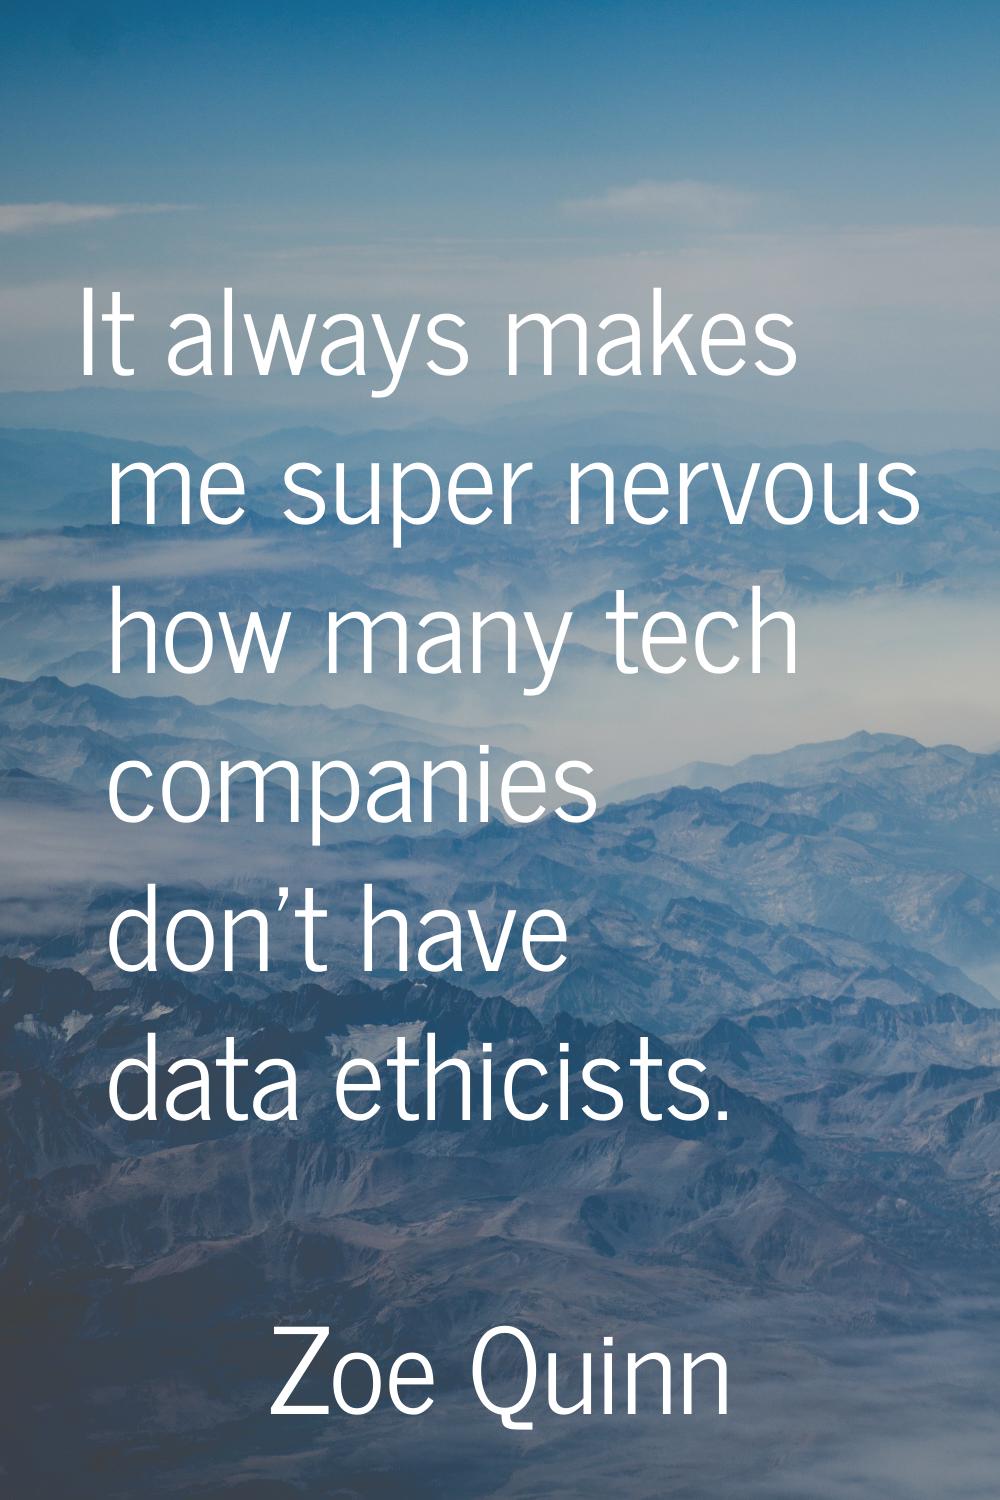 It always makes me super nervous how many tech companies don't have data ethicists.